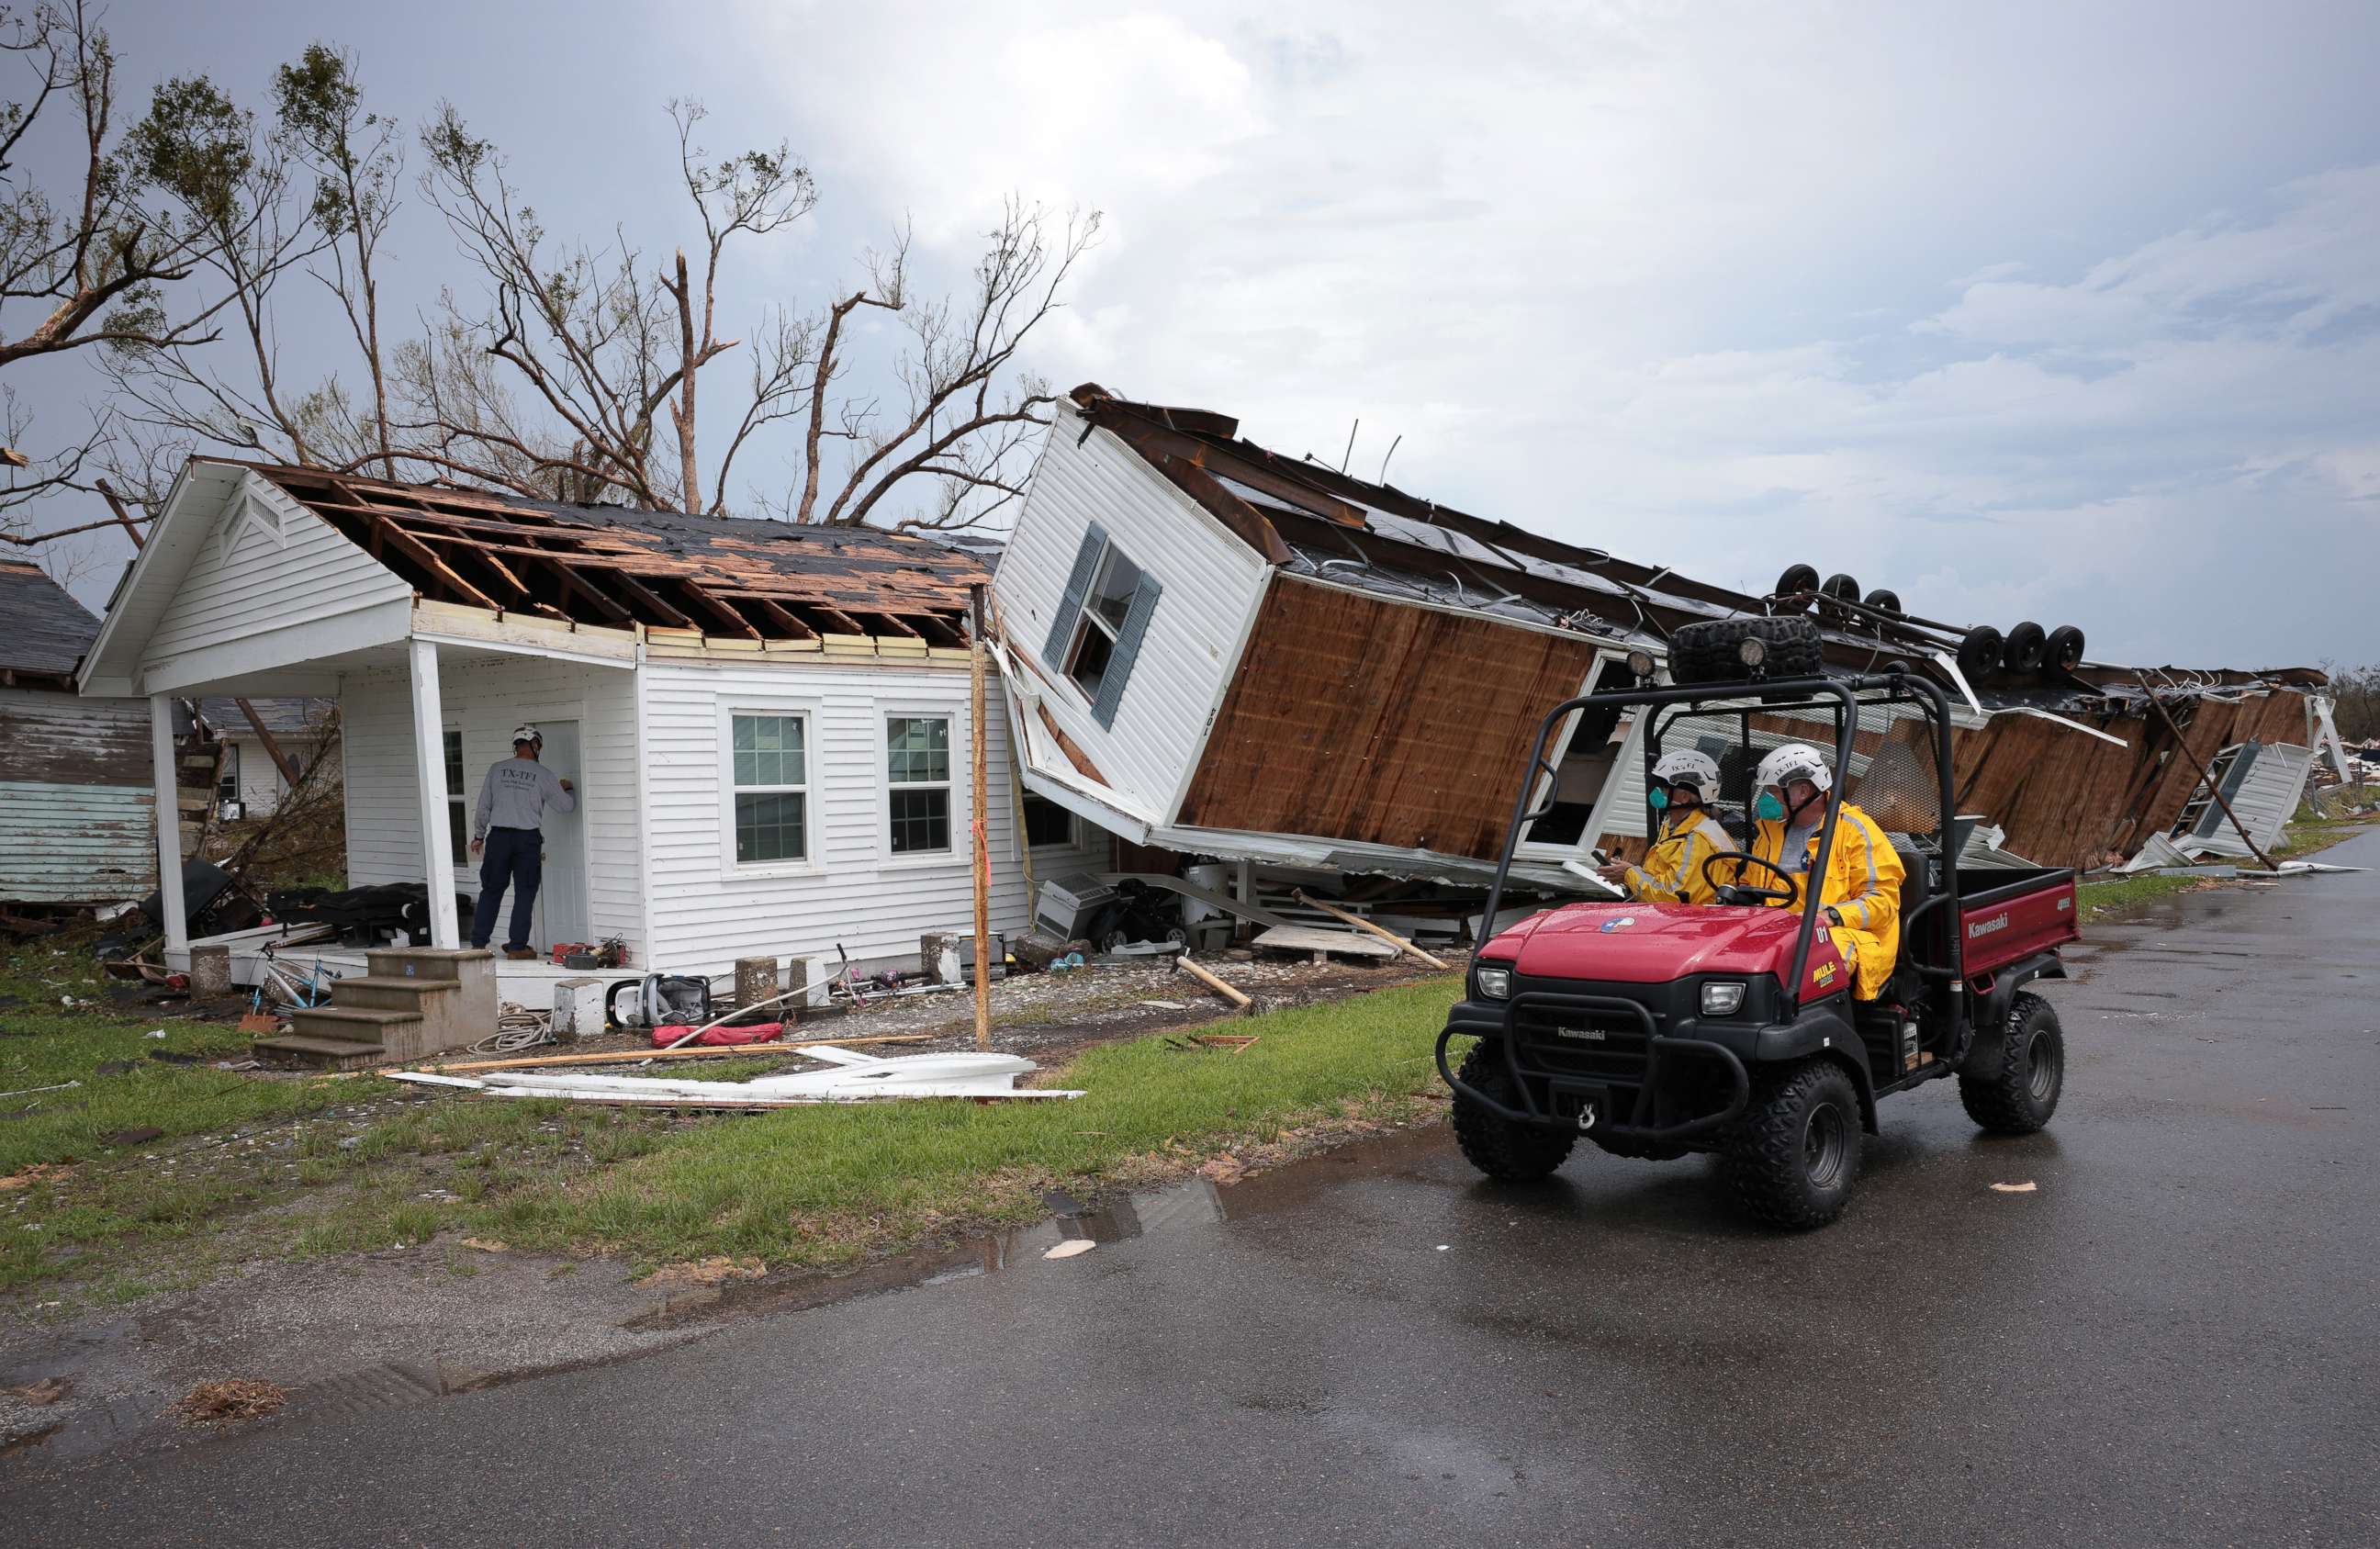 PHOTO: A search and rescue team from Texas works outside a home destroyed by Hurricane Ida, Sept. 1, 2021, in Golden Meadow, La.